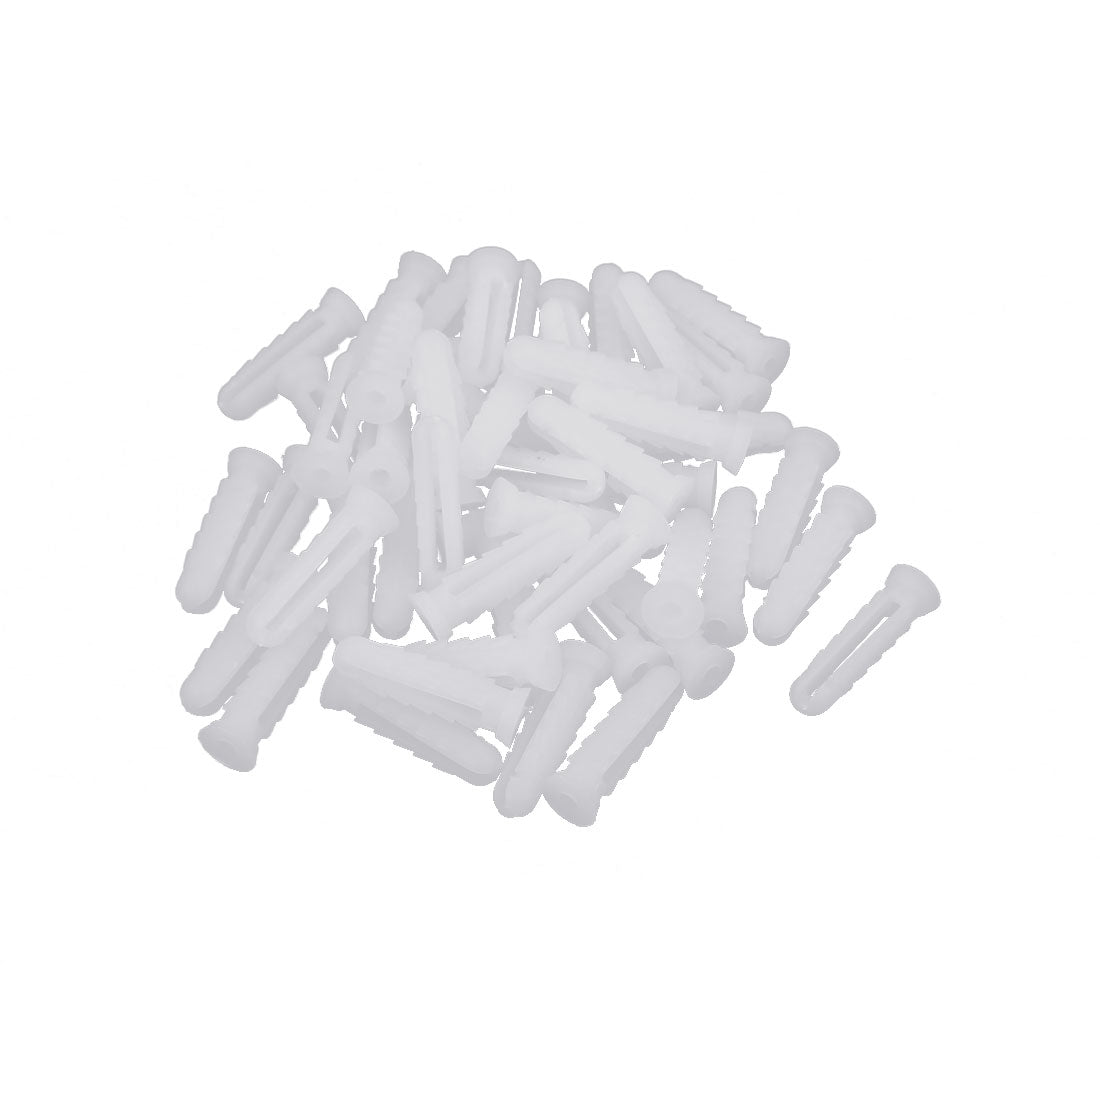 uxcell Uxcell 6mm x 25mm Plastic Expansion Nail Plugs Wall Anchor Screw White 50pcs